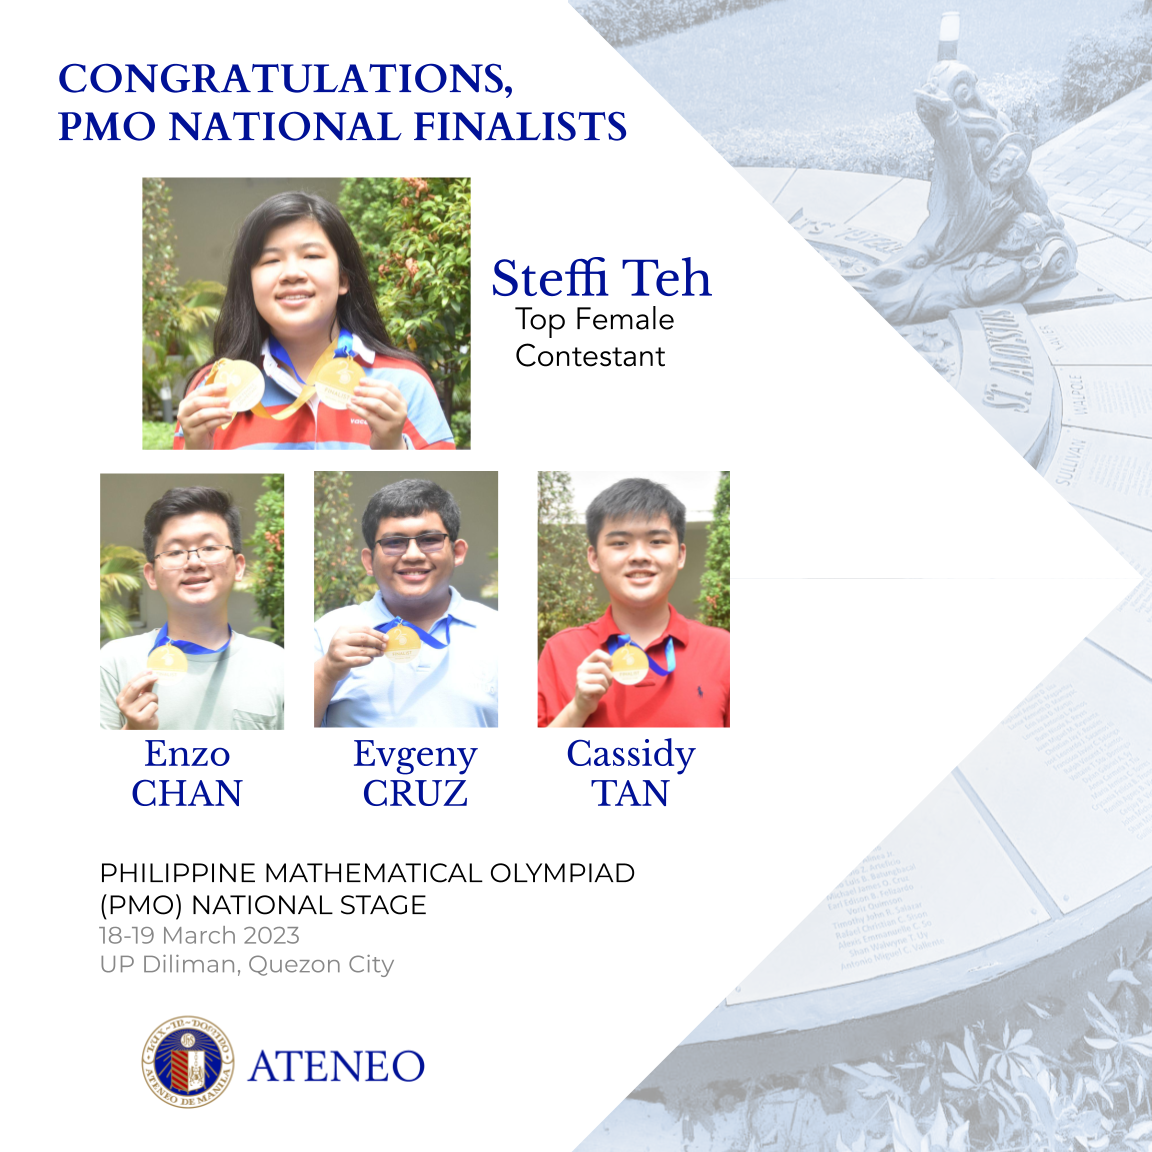 Four ASHS mathletes are PMO National Round finalists, including Top Female Contestant Steffi Teh. 